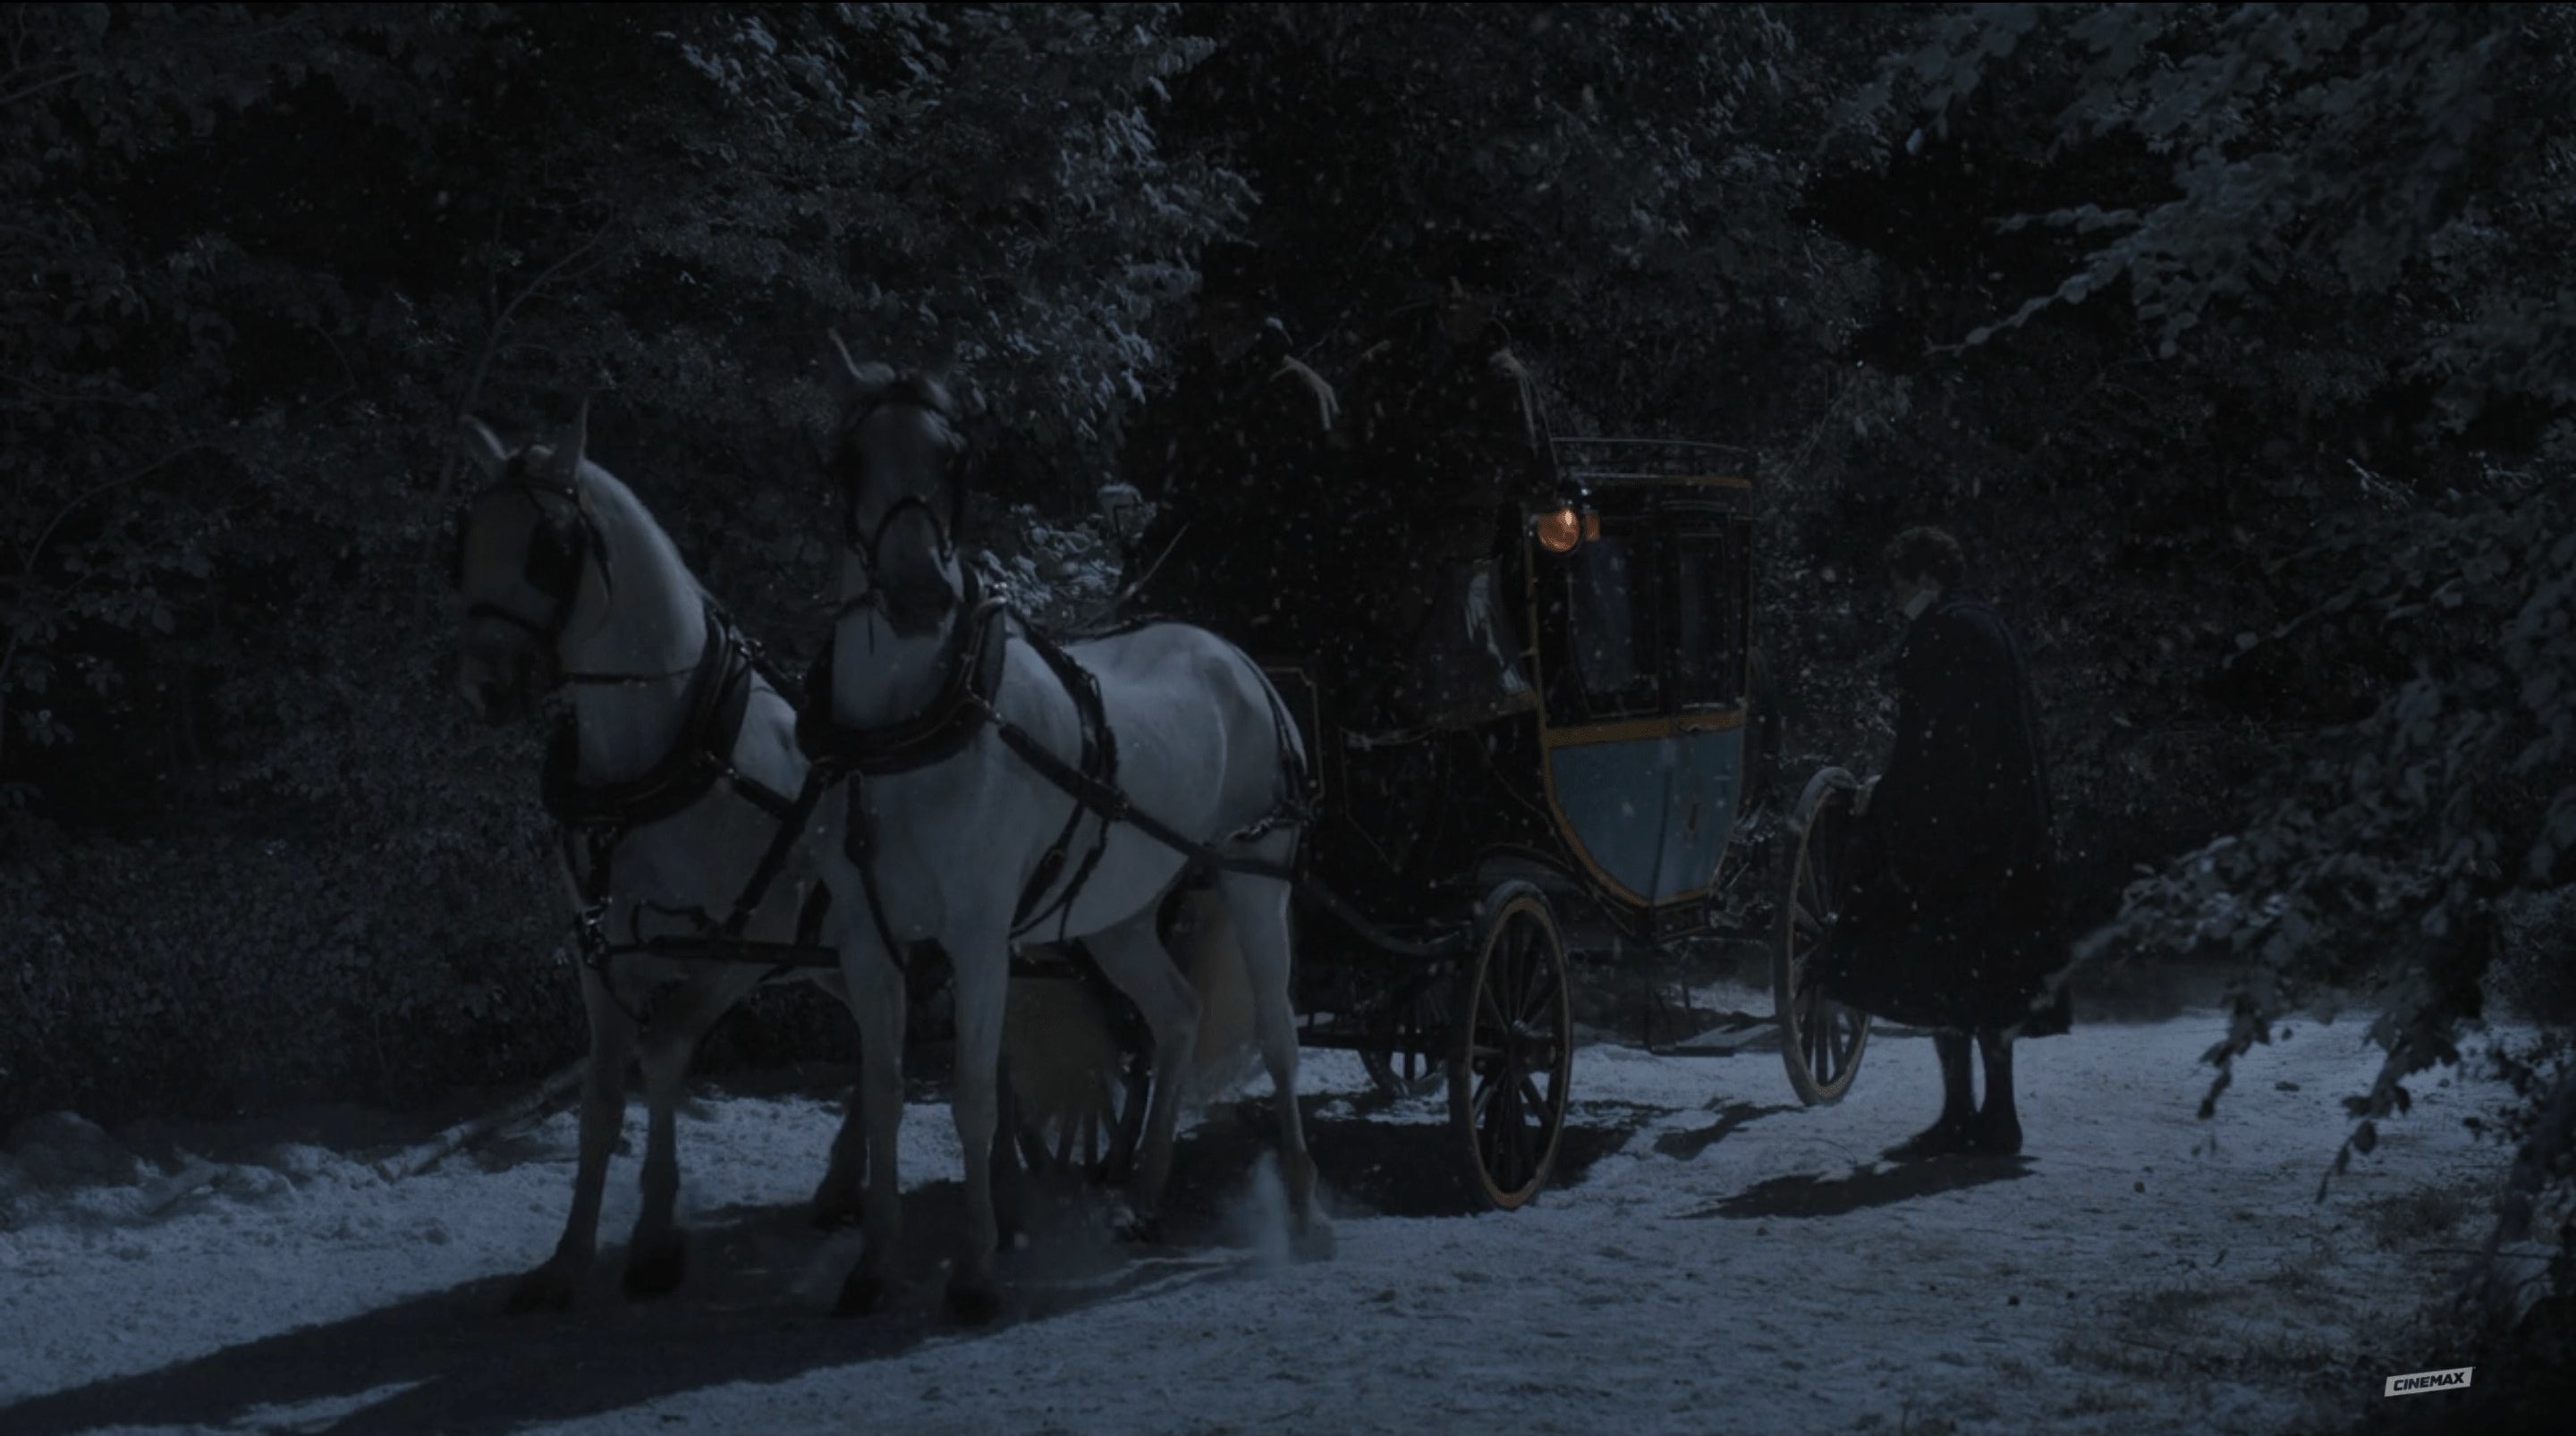 A carriage drawn by two horses sits in the snow